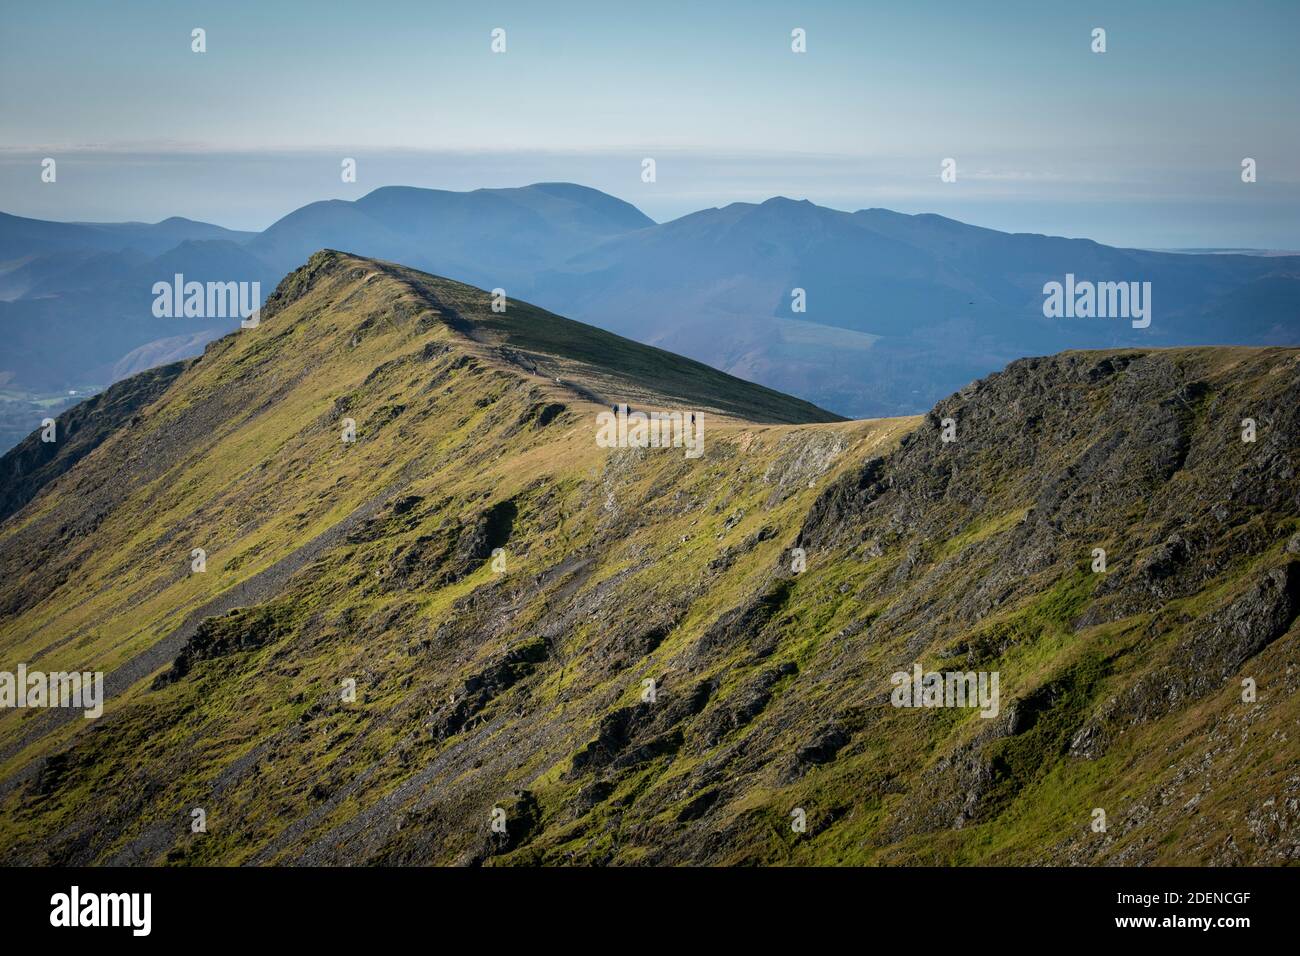 Looking along the summit ridge of Blencathra in the English Lake District Stock Photo